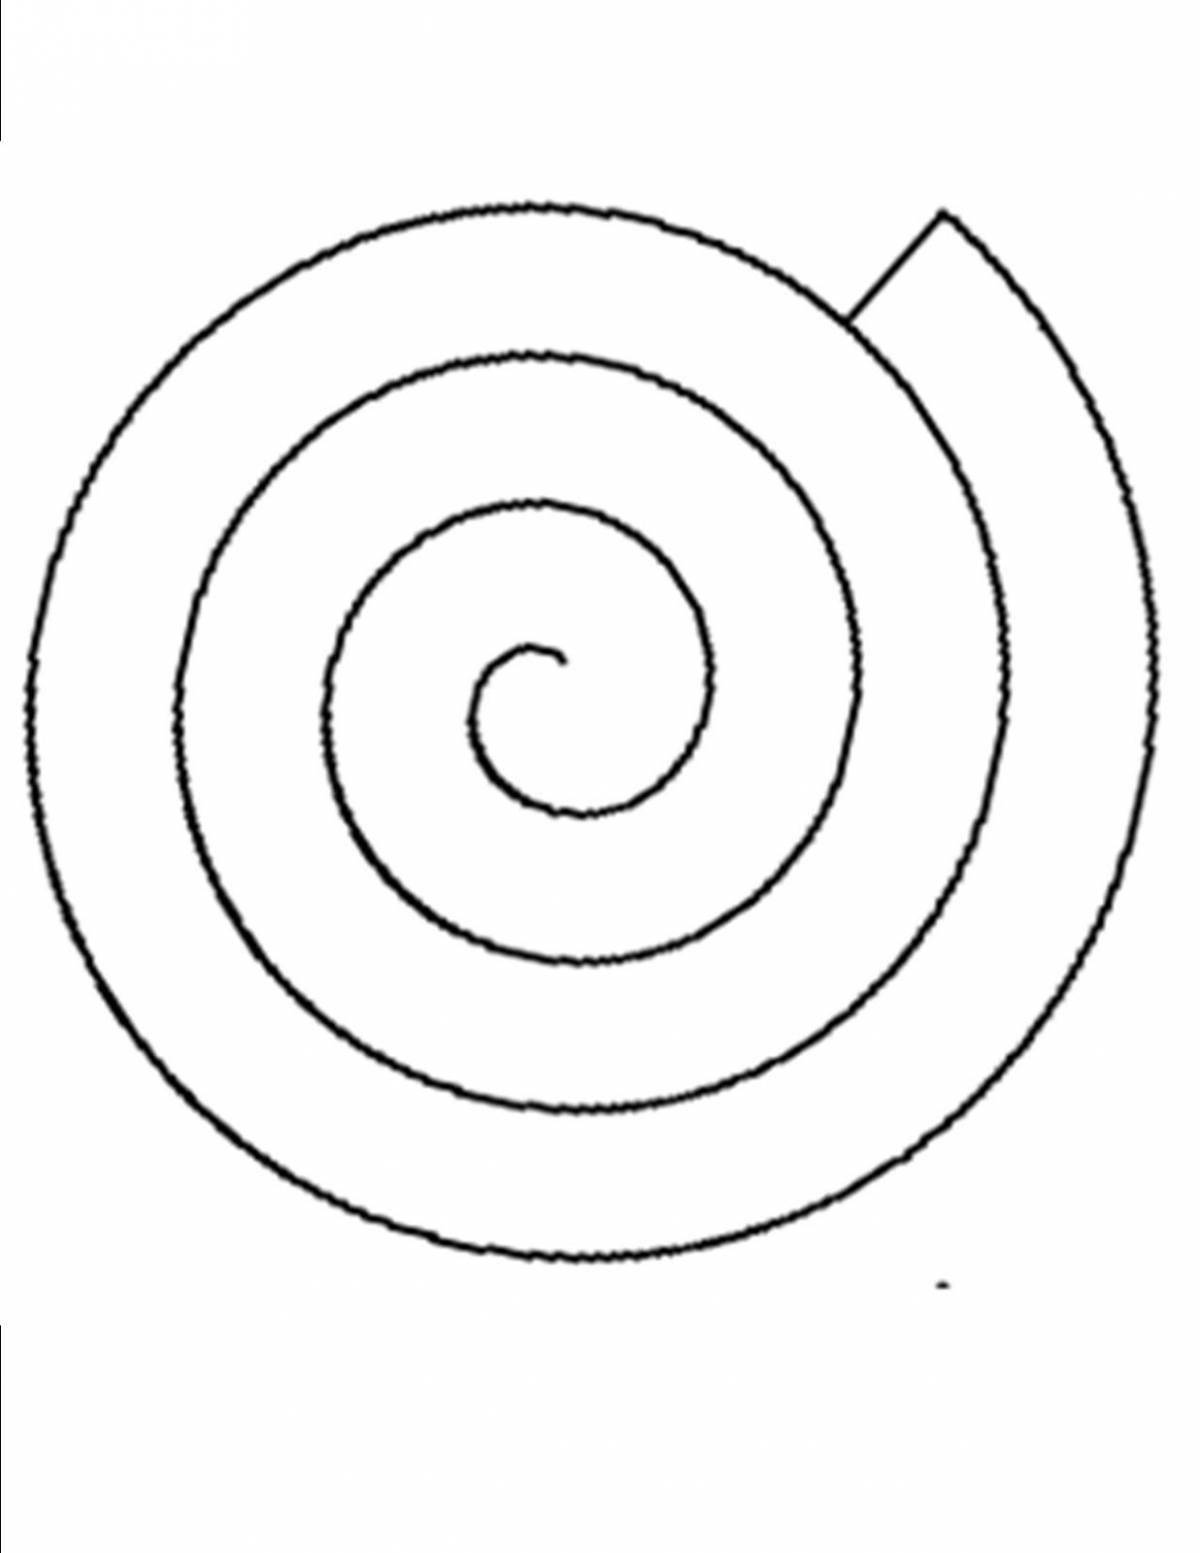 Genshin glowing spiral coloring page